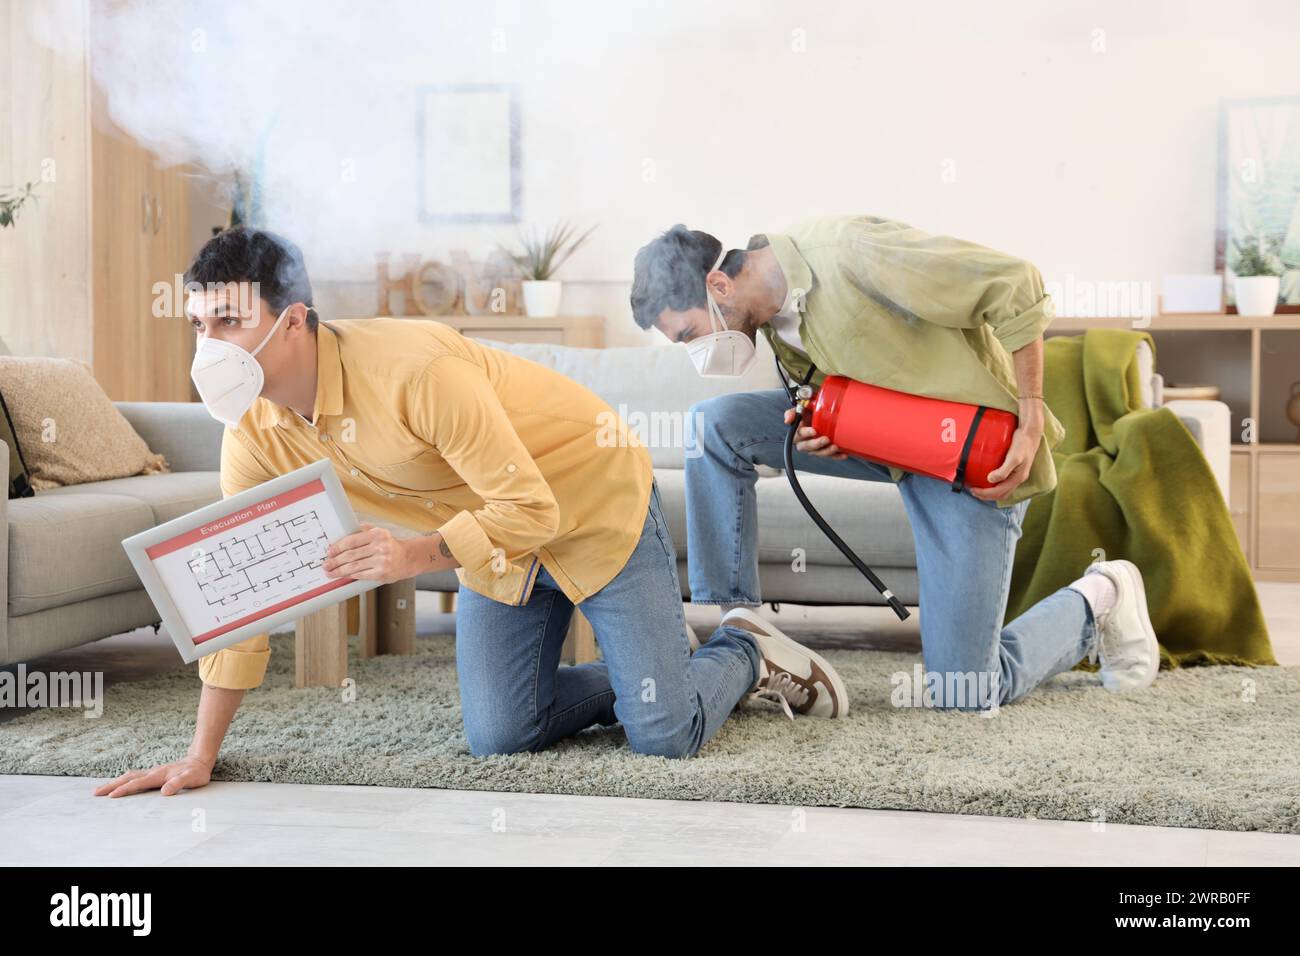 Young men with evacuation plan and fire extinguisher in burning building Stock Photo